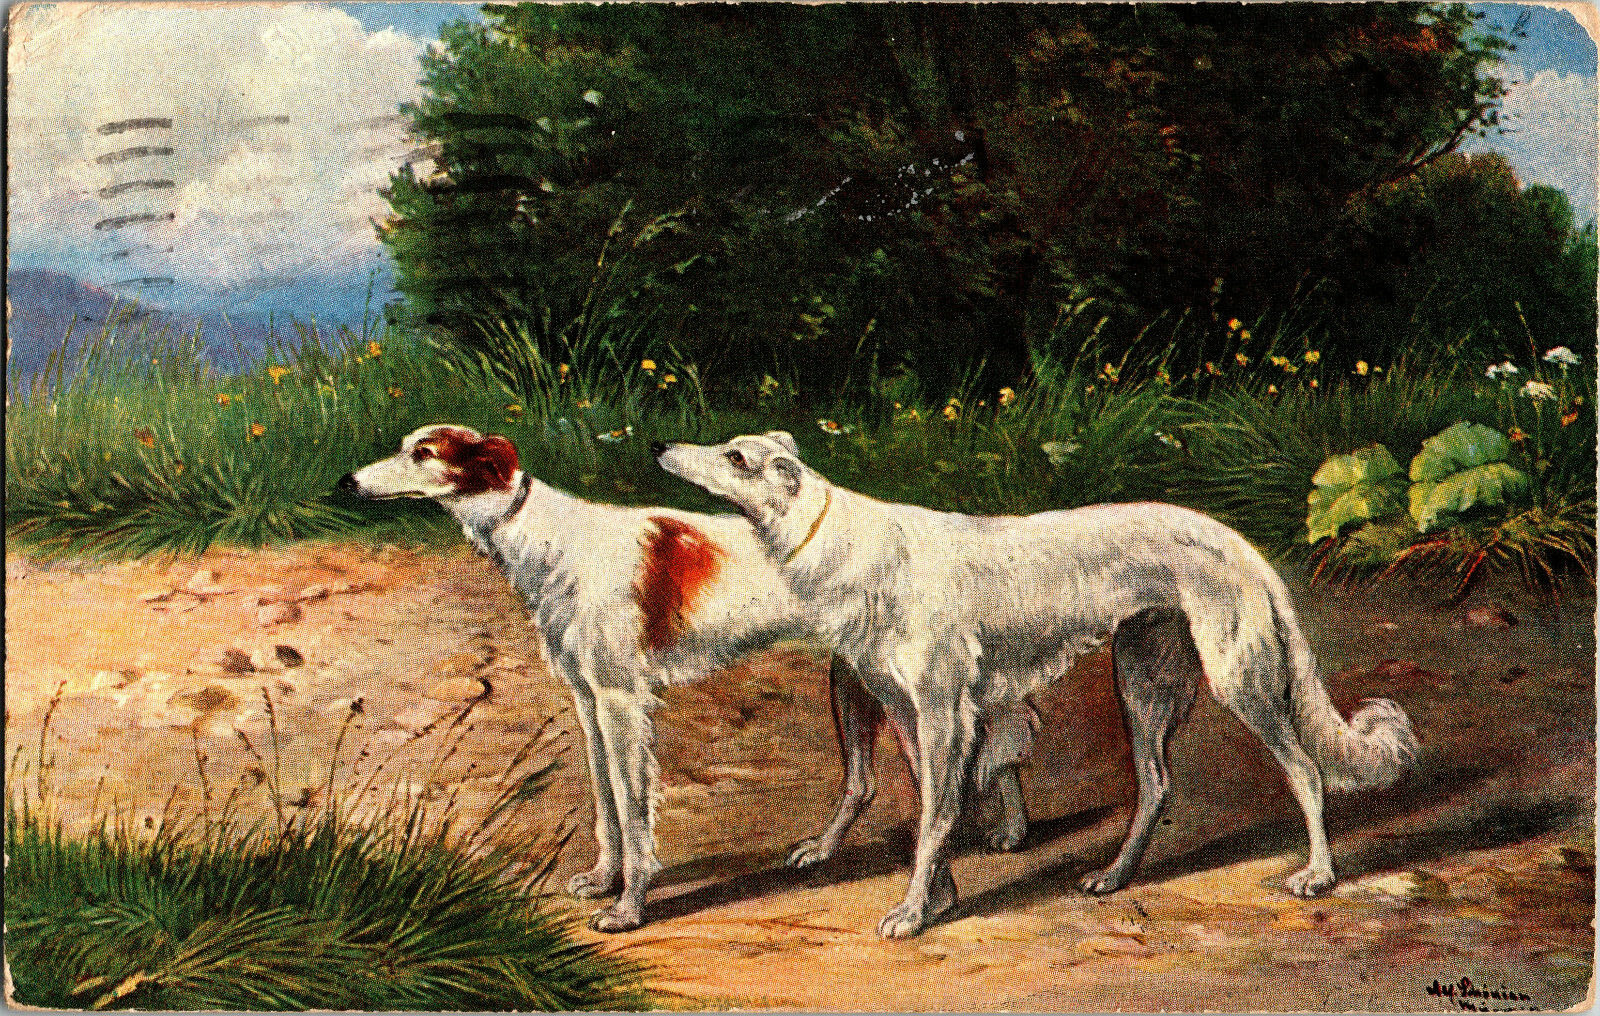 Antique Dog 1901 Postcard TWO DOGS - German American Novelty Art Series 670